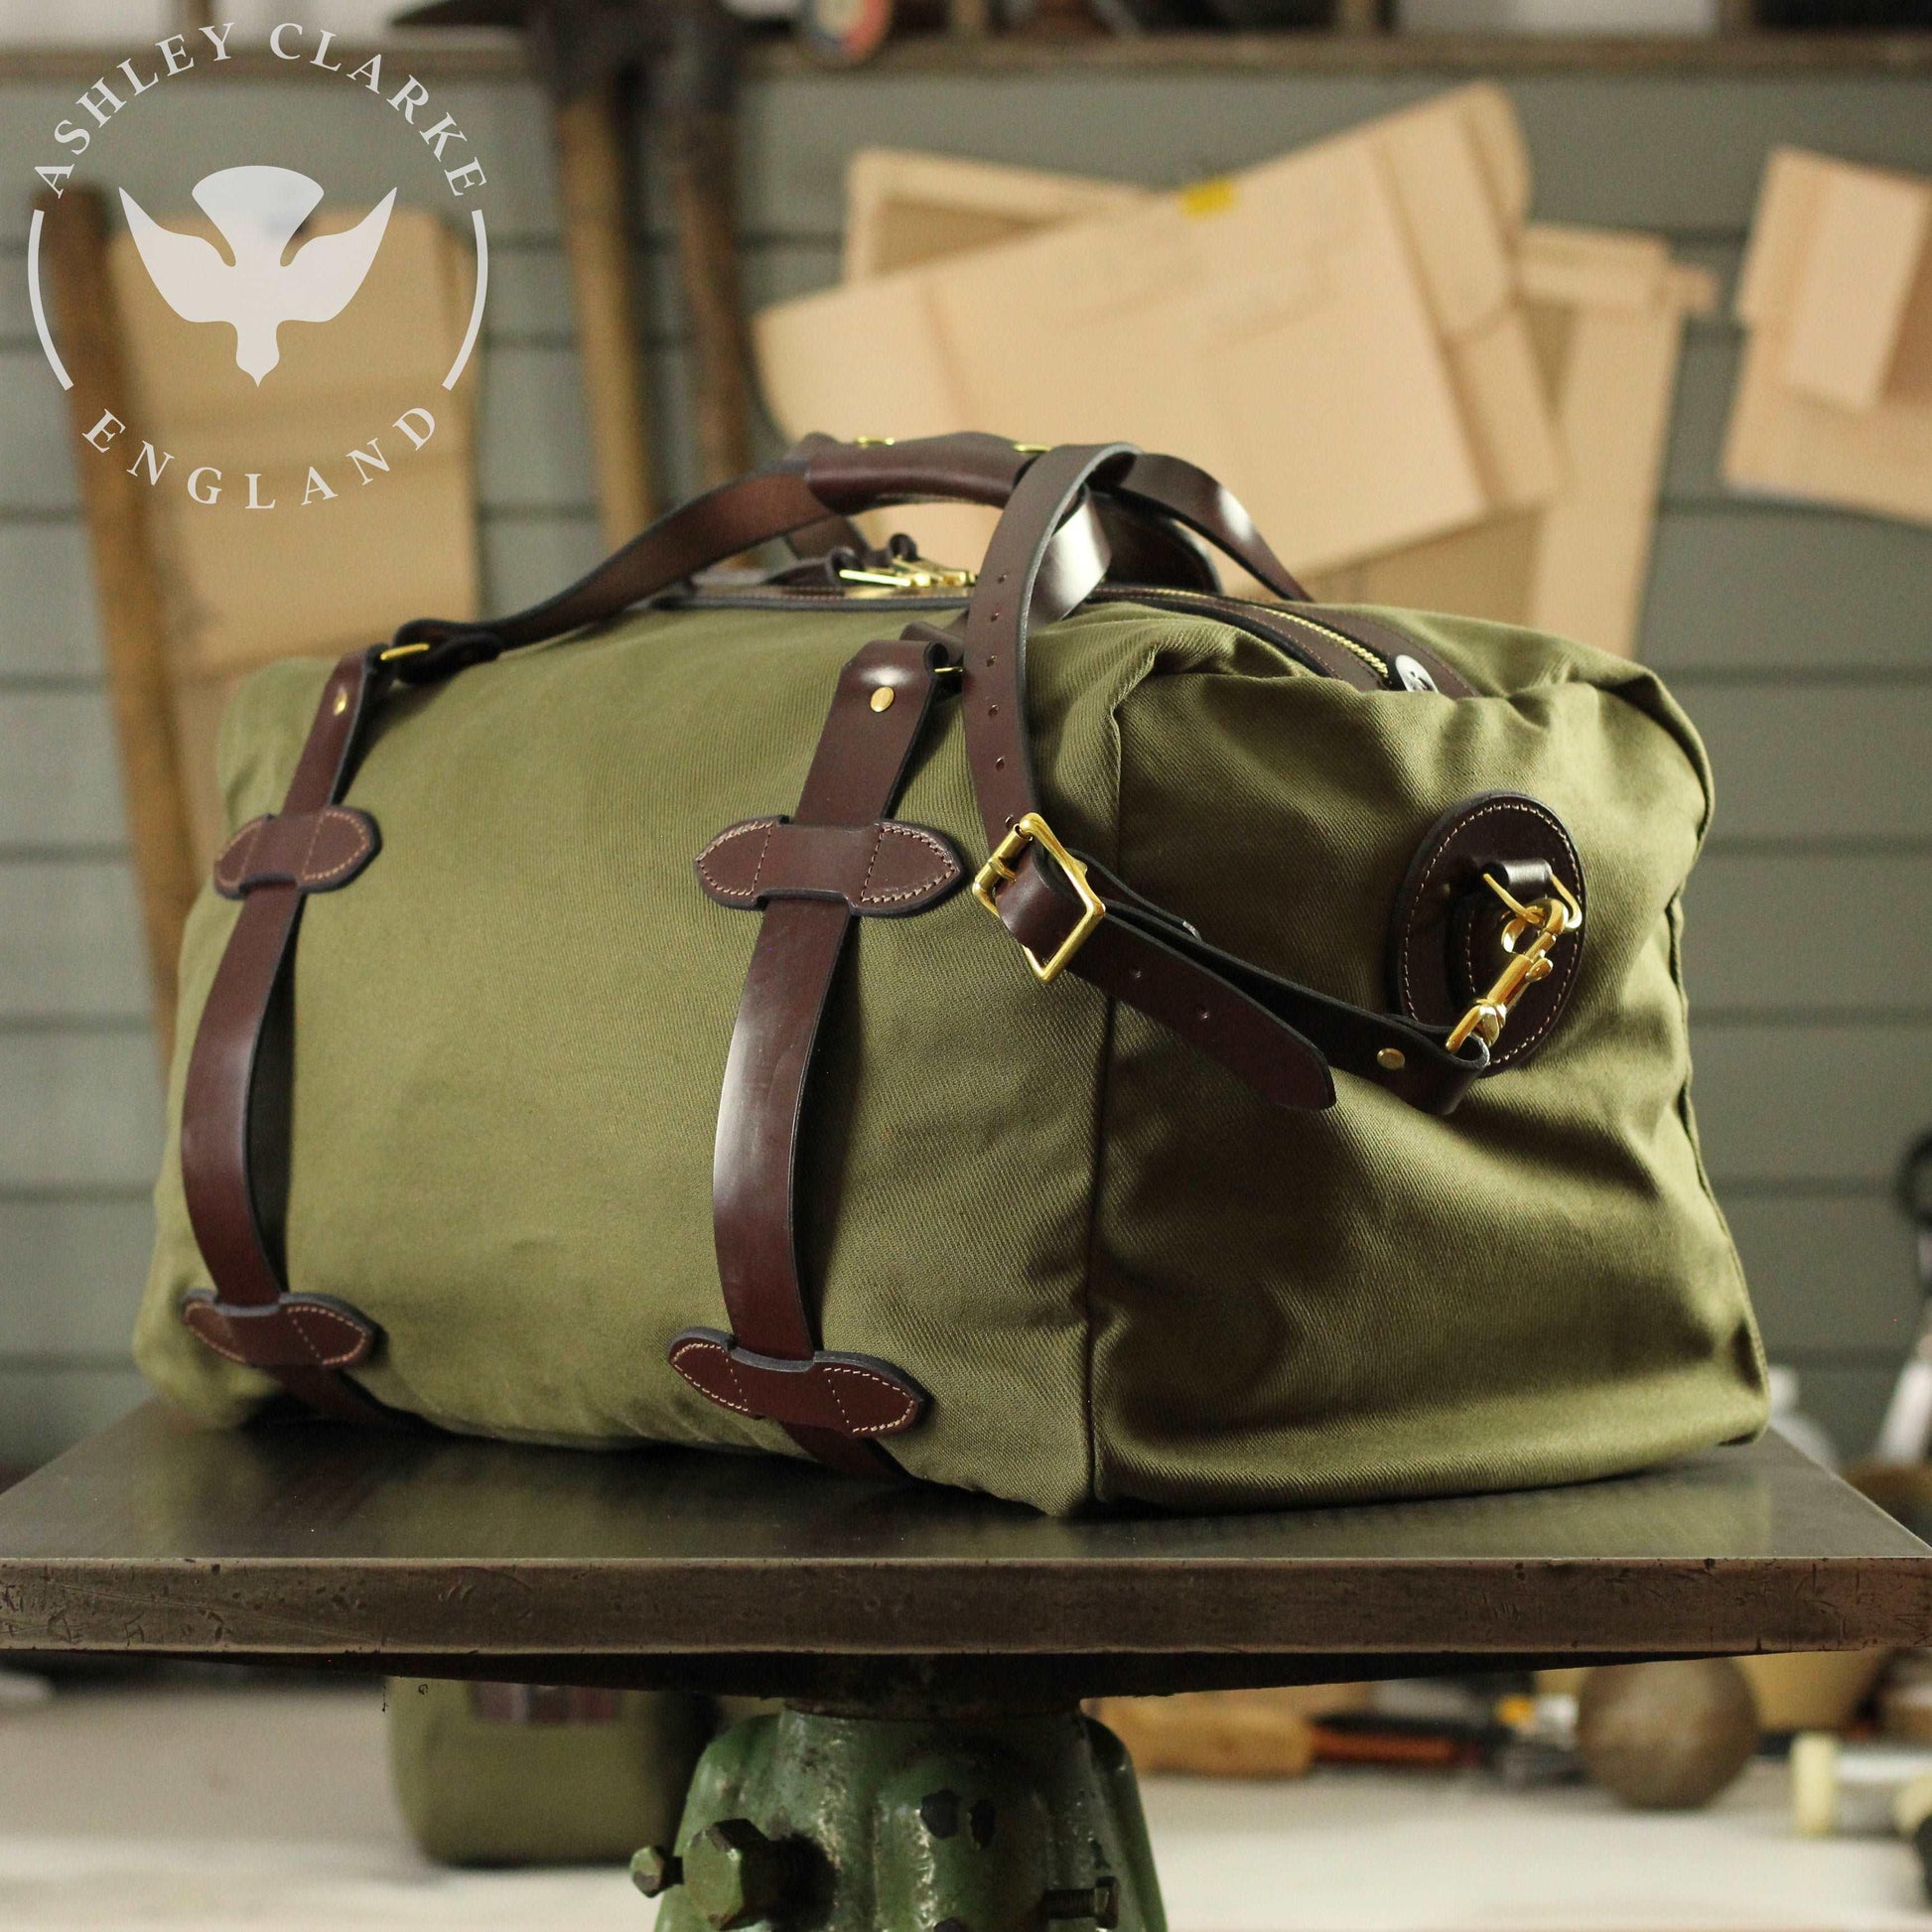 a green waxed canvas holdall bag by ashley clarke england on top of a table